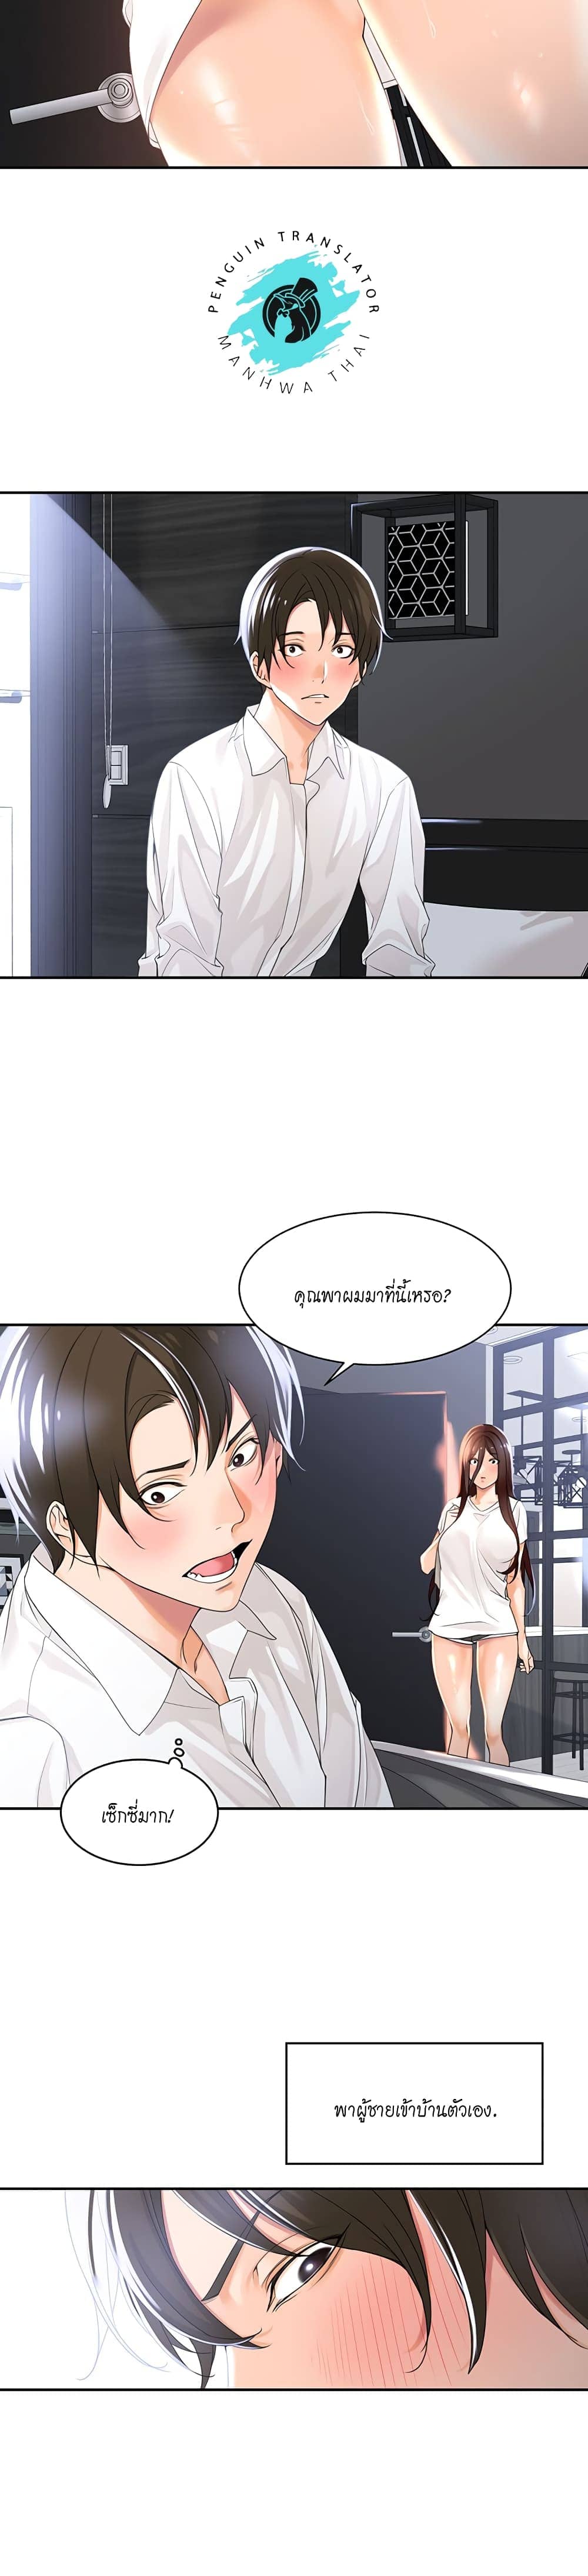 Manager, Please Scold Me ตอนที่ 2 ภาพ 20